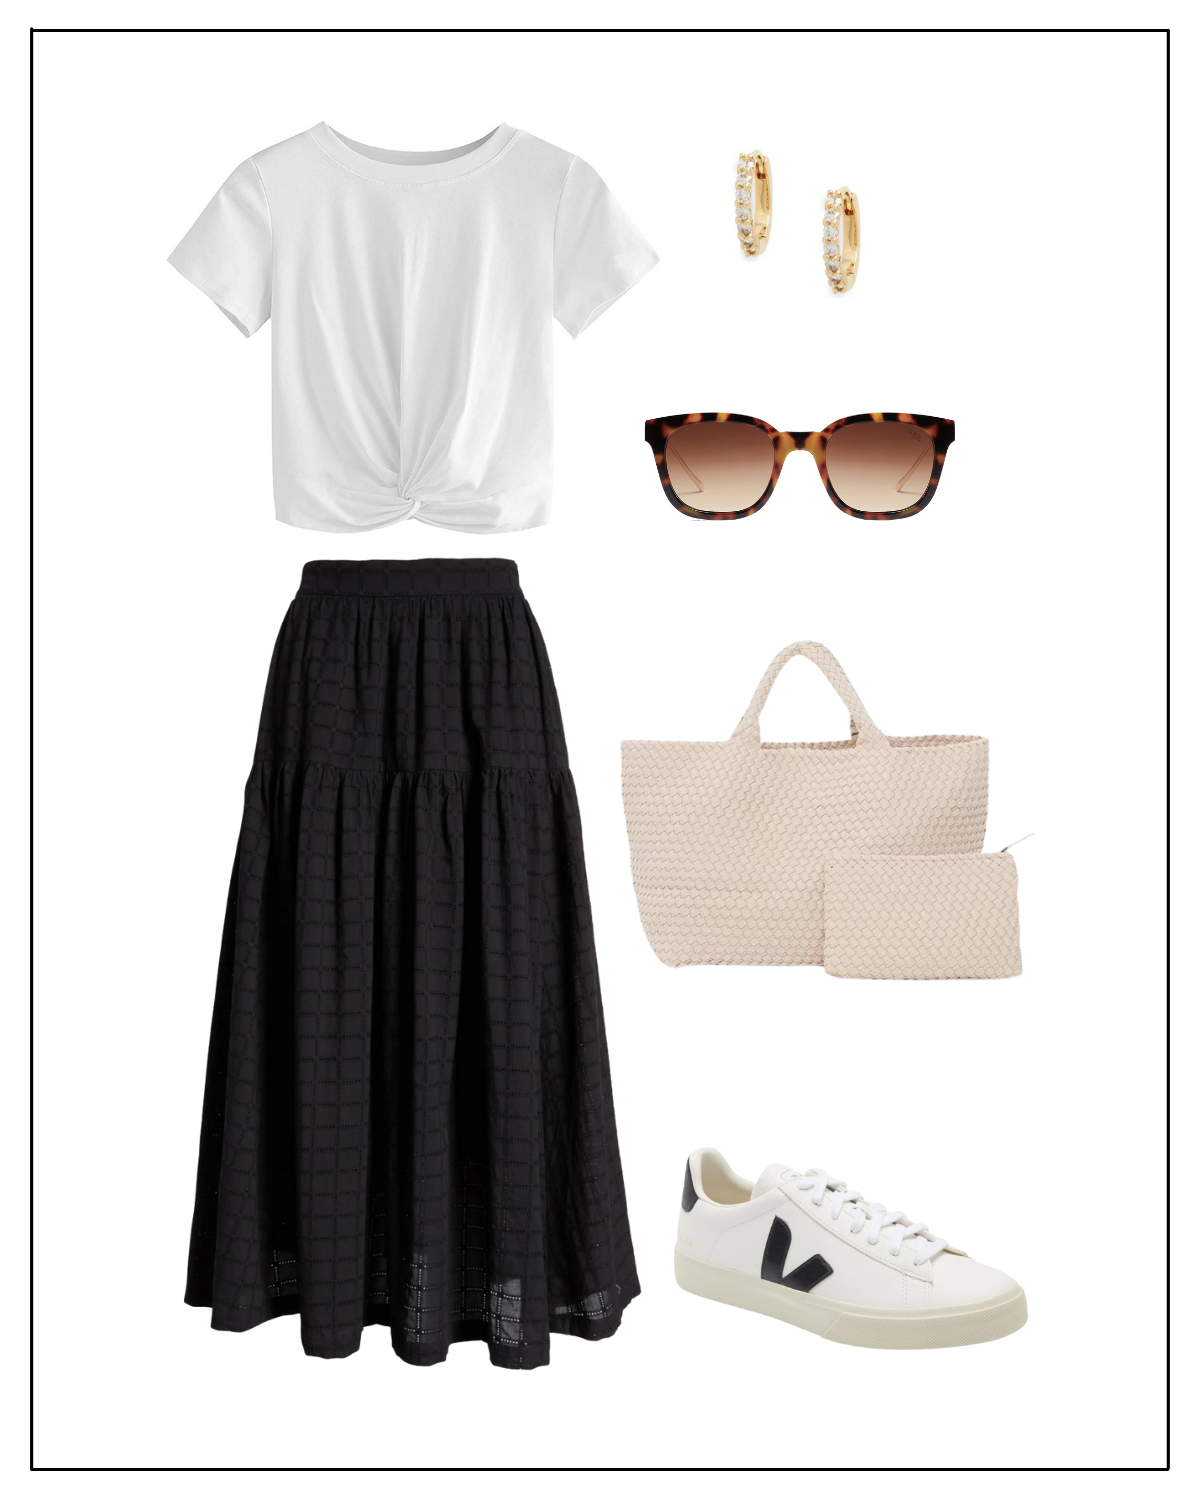 How to Style a Midi Skirt for the weekend